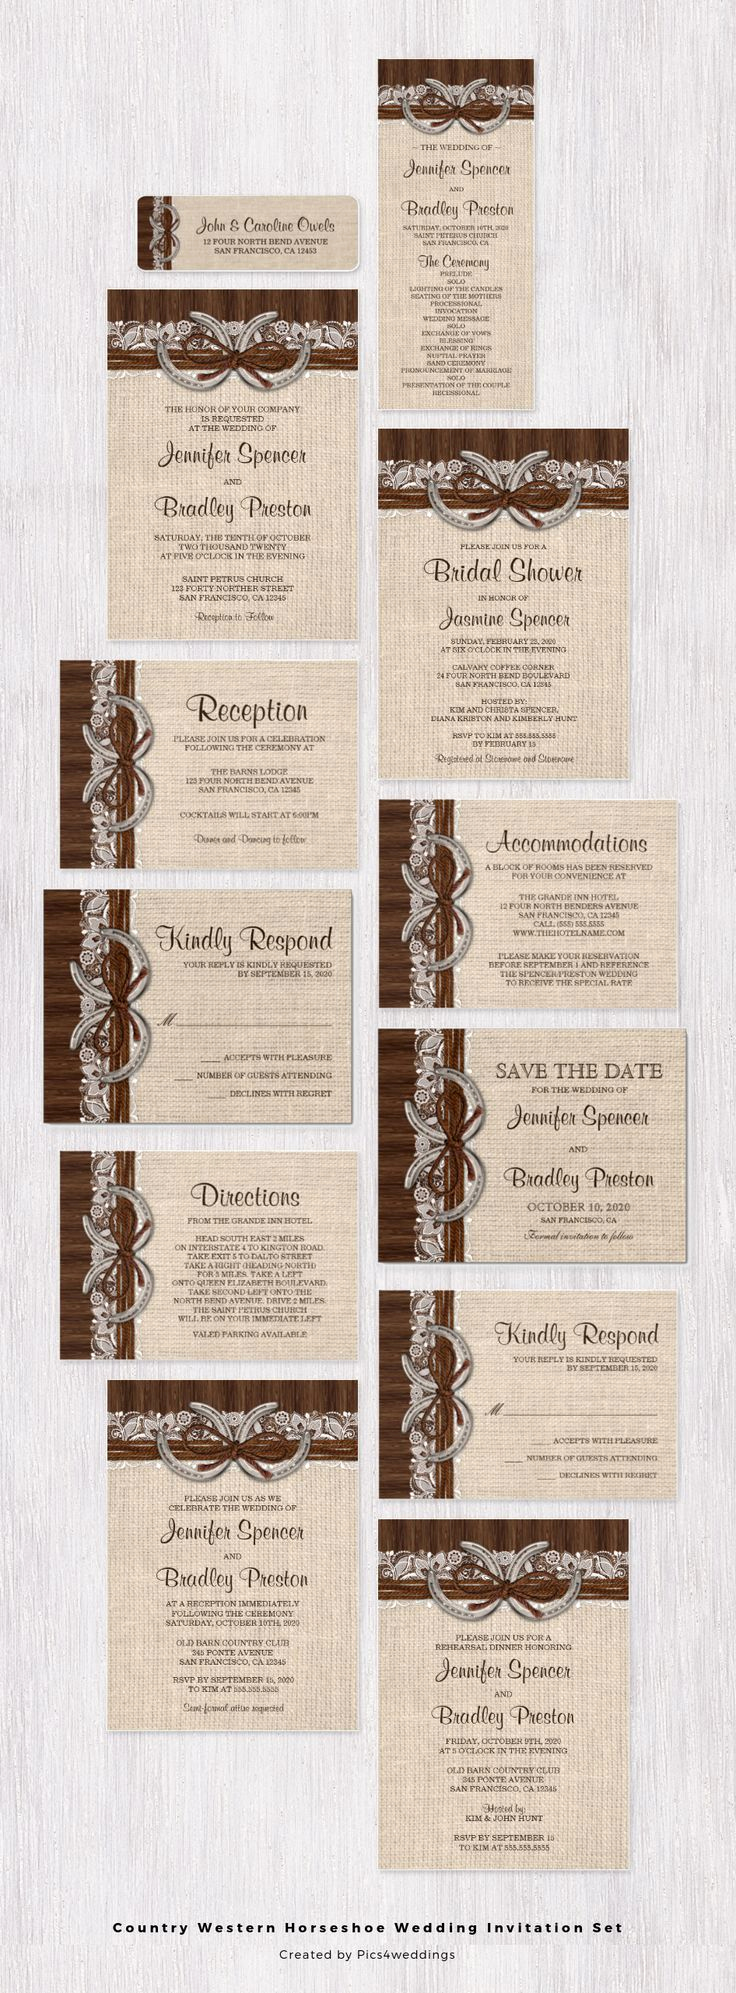 Rustic Wedding Invitation Sets Fresh 53 Best Images About Country Western Wedding On Pinterest